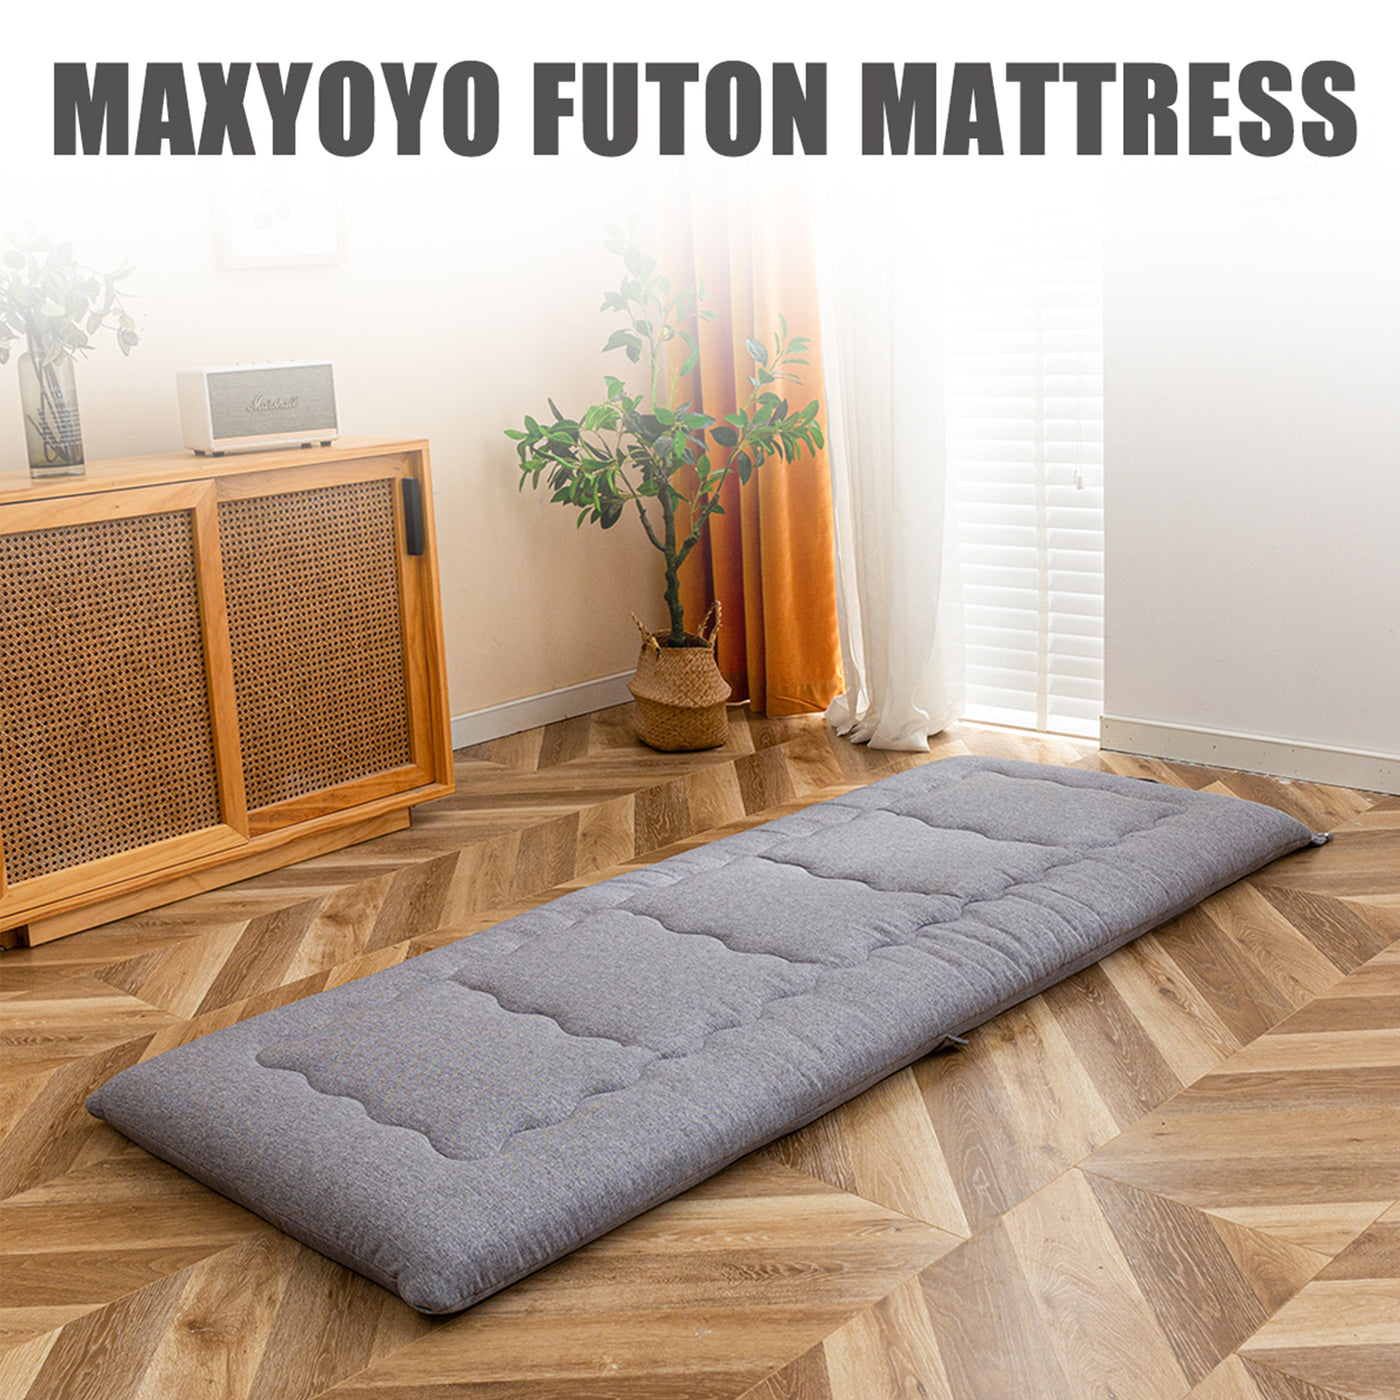 MAXYOYO Roll Up Camping Mattress, Carry Handle Foldable Futon Mattress Outdoor Indoor Roll Out Pad, Grey